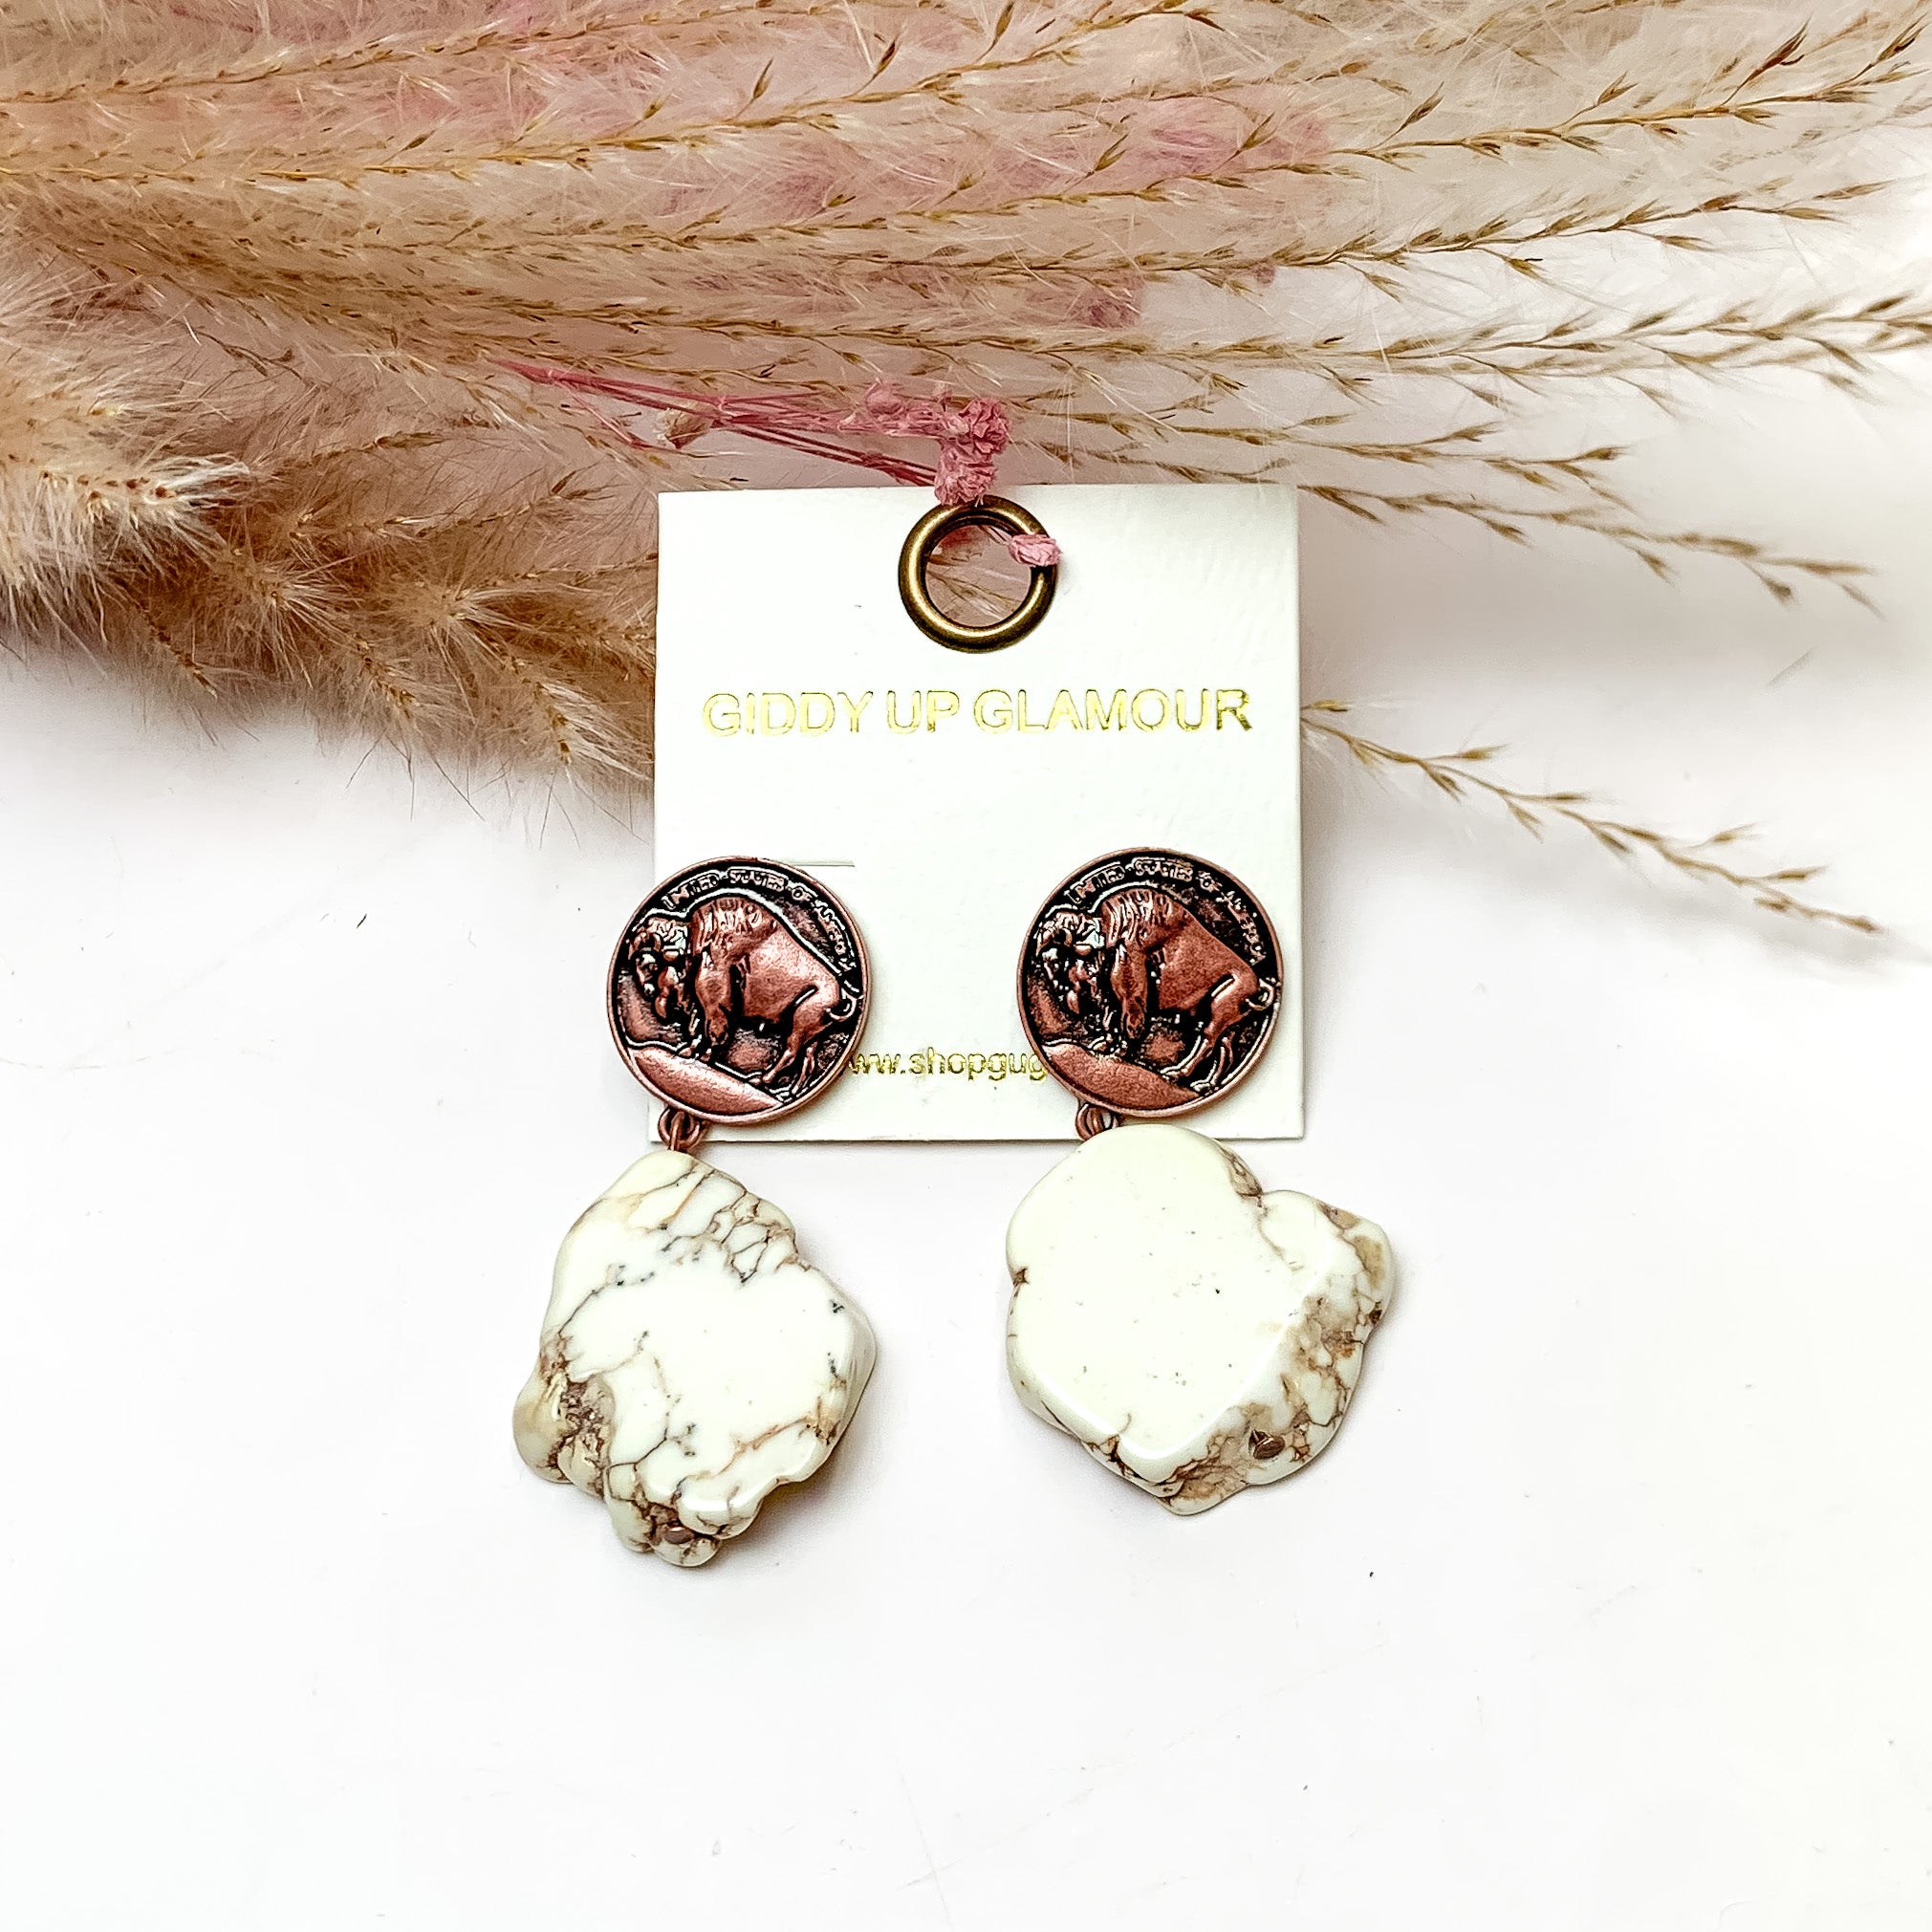 Ivory Stone Earrings With Copper Tone Coin Posts. These earrings are pictured on a white background with flowers behind for decoration.